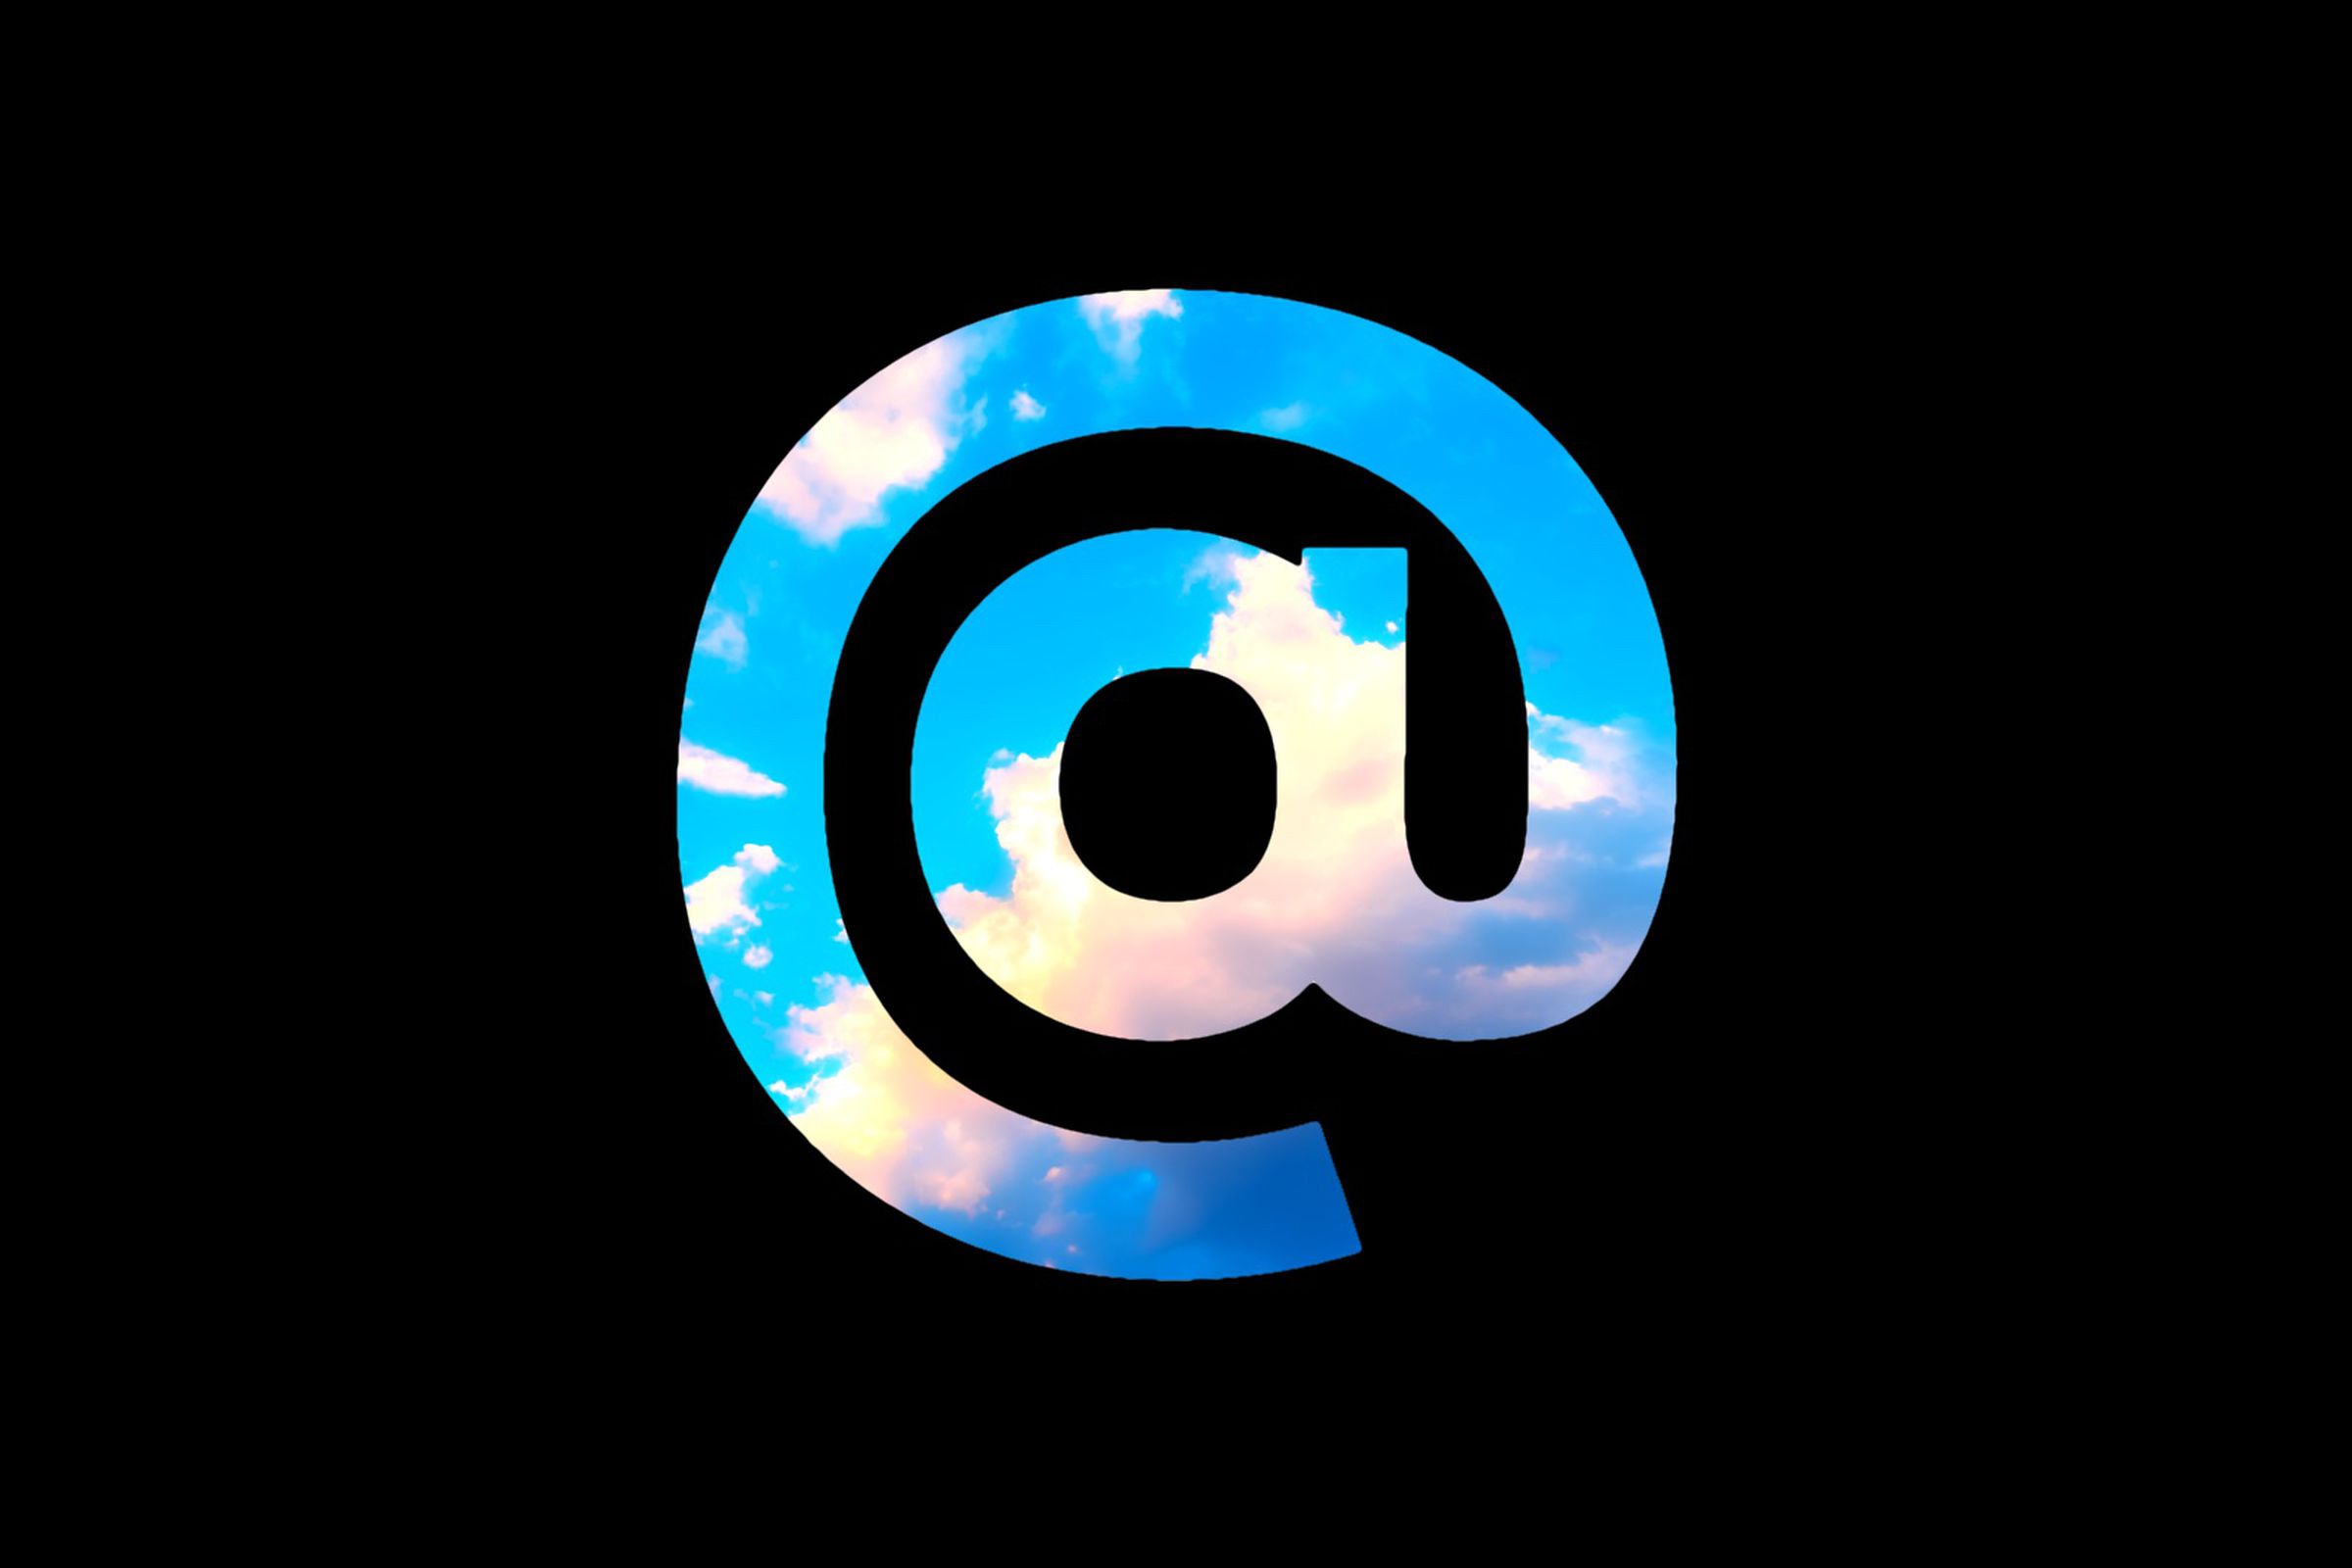 The logo for the AT Protocol that powers the Bluesky app.